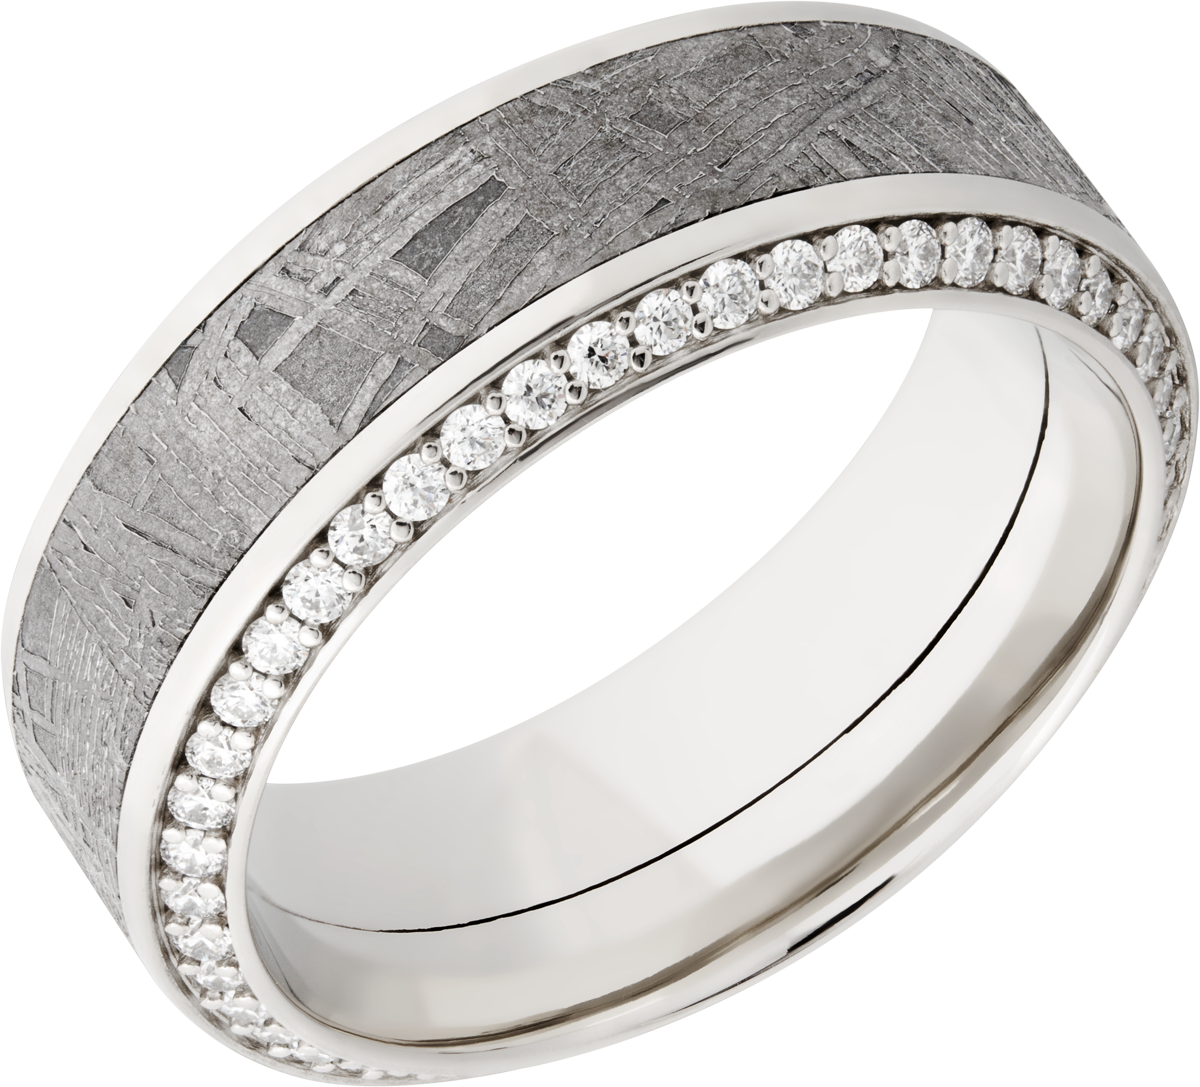 14k White gold 8.5mm high beveled edge band with on inlay that is 4.5mm wide of meteorite. With 1.3